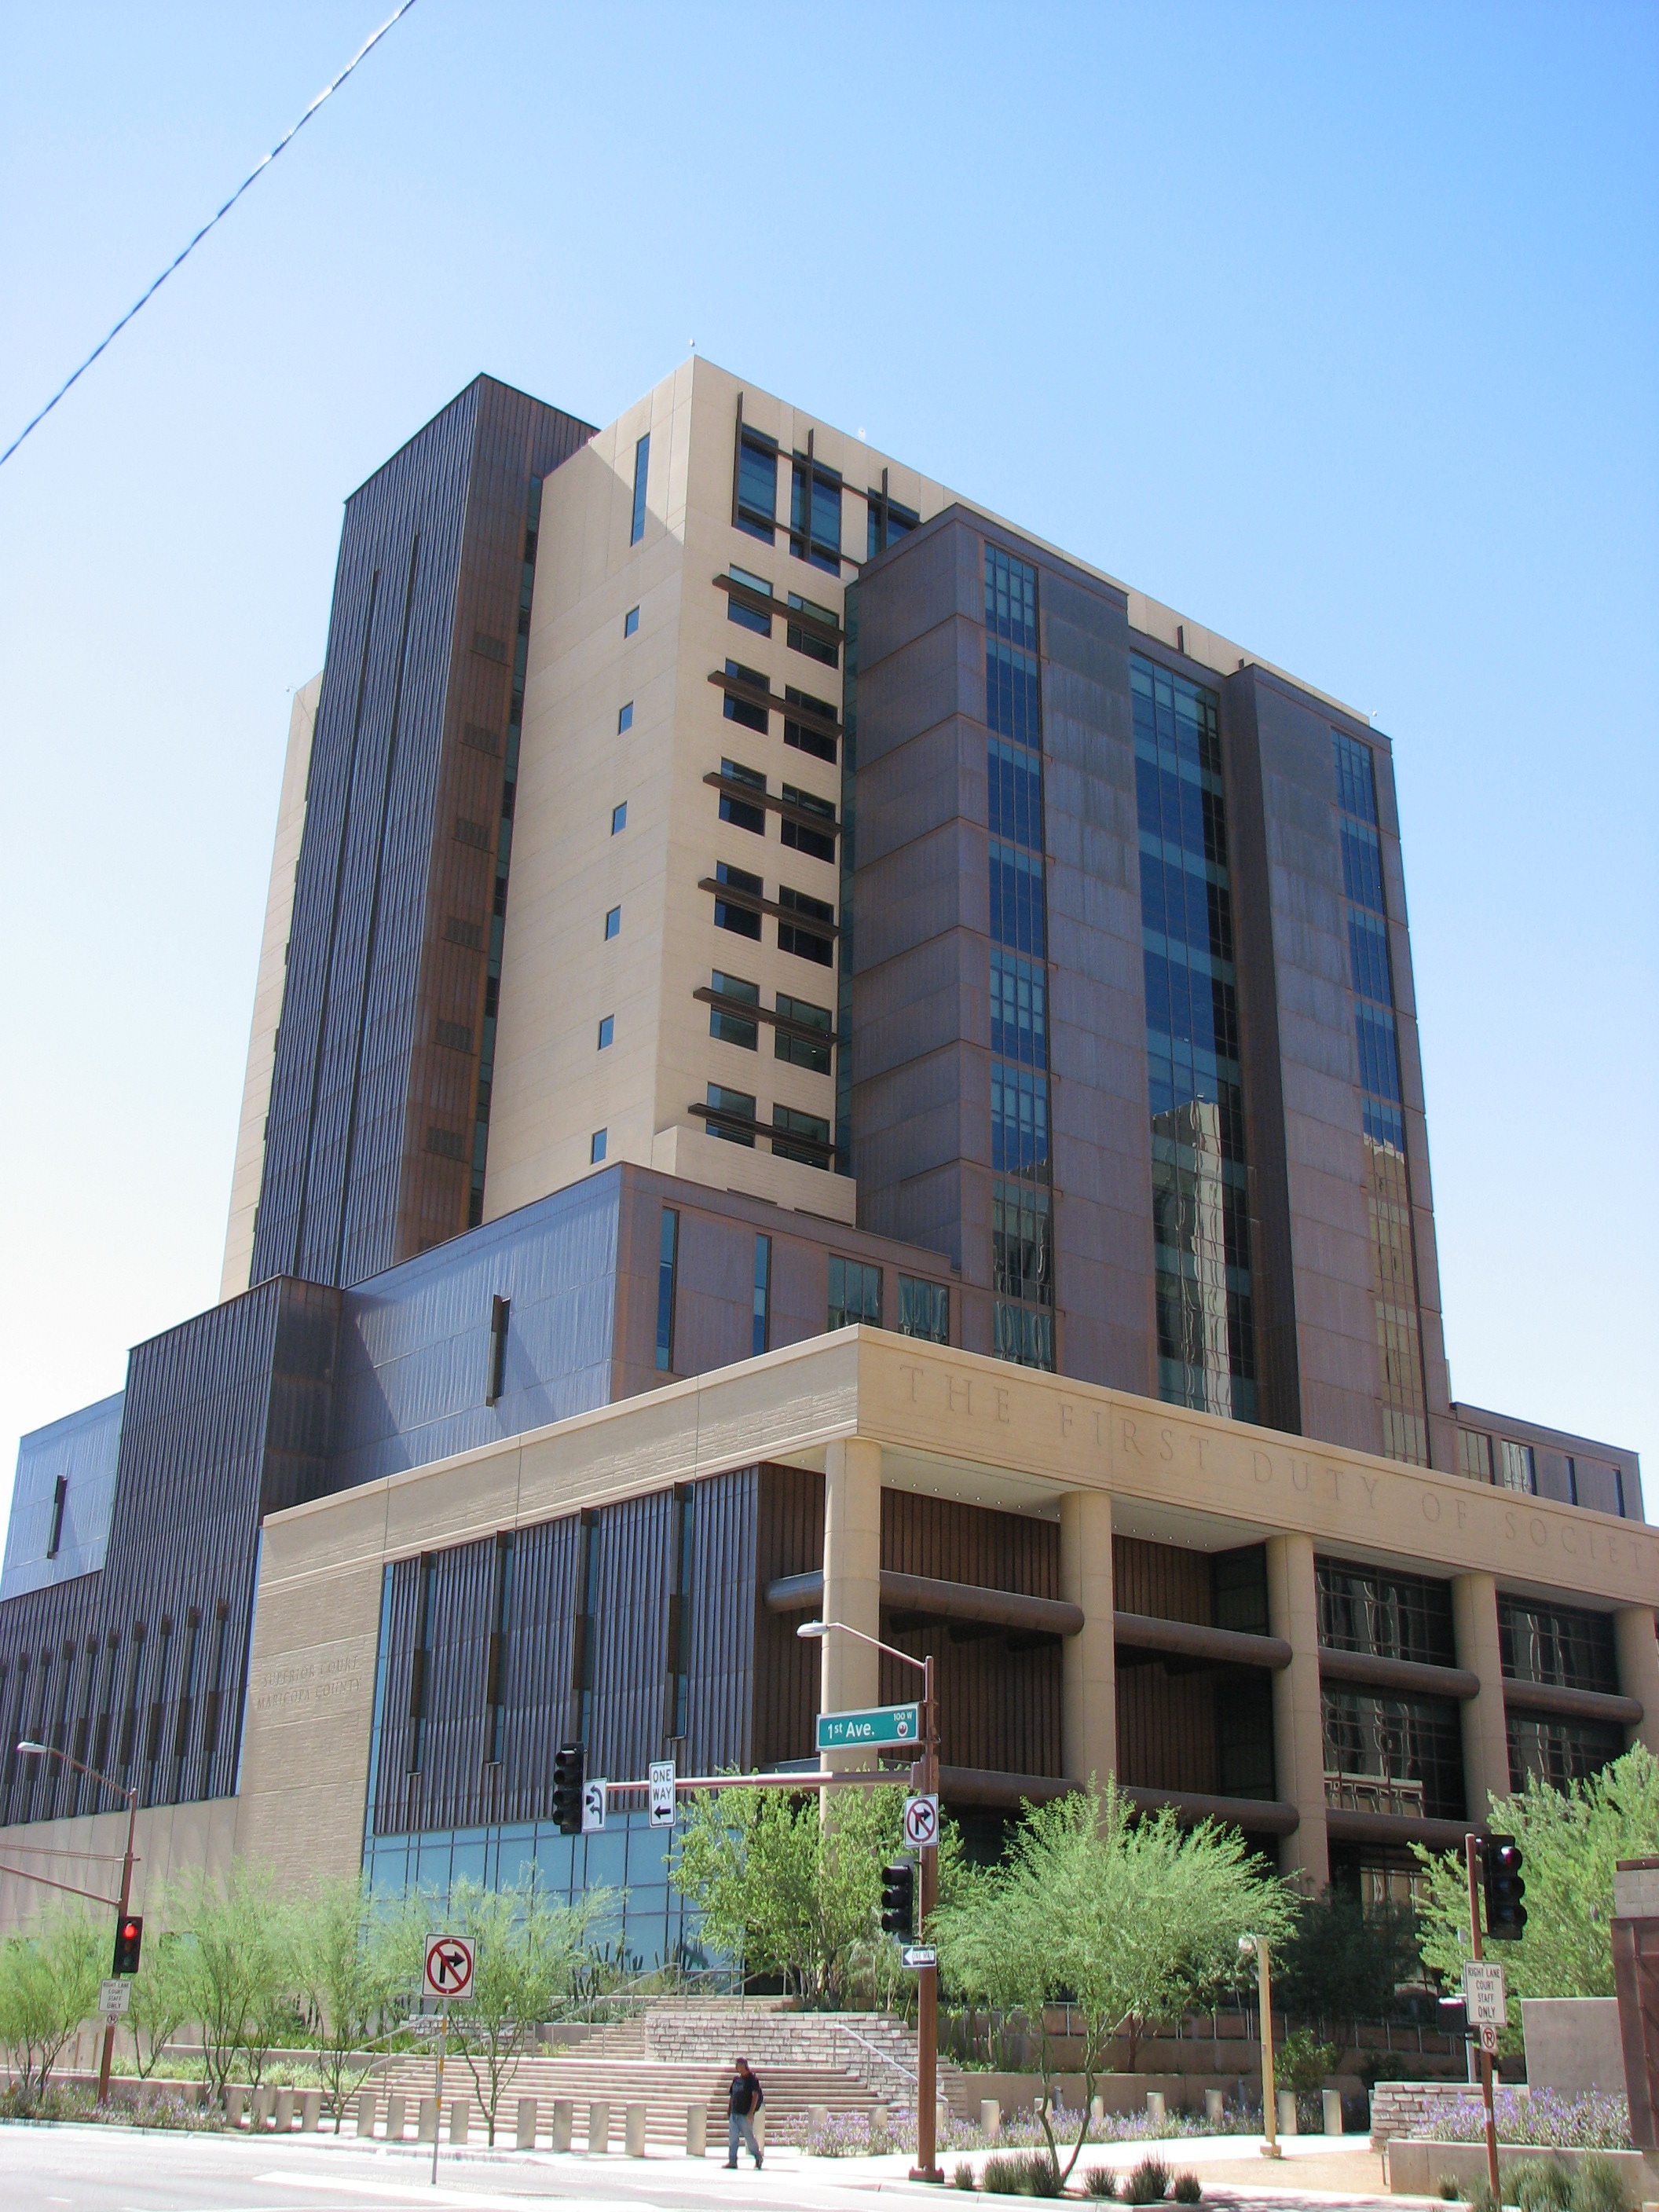 jason haller and maricopa county court records